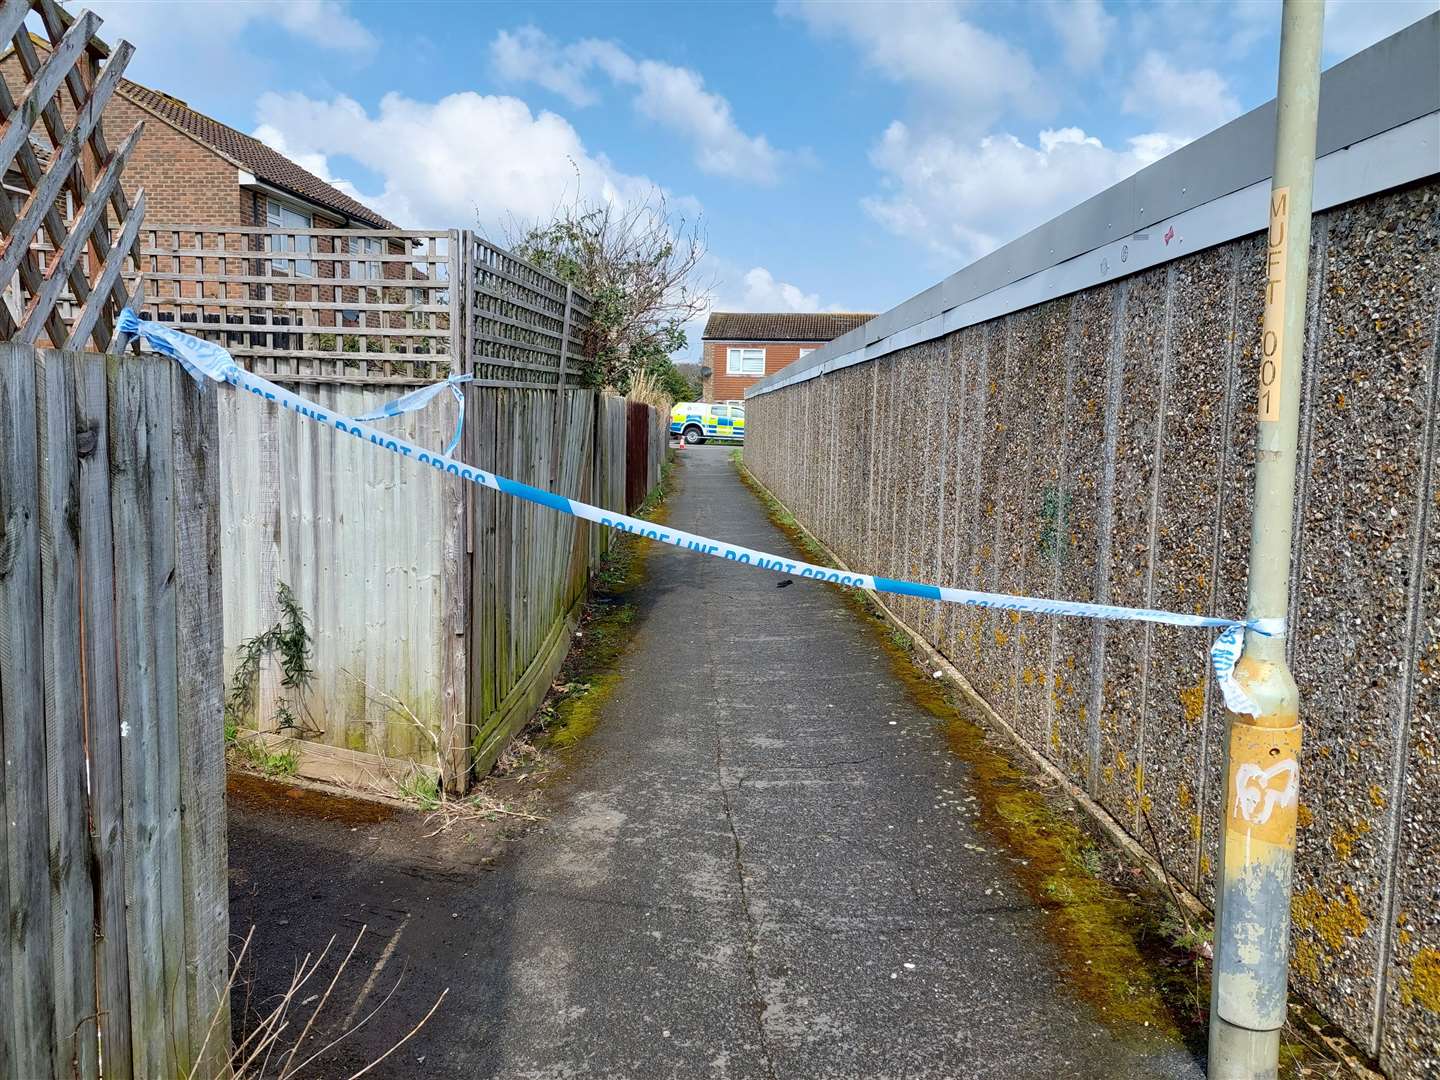 Part of an alleyway which runs close to Bybrook Cemetery was taped off